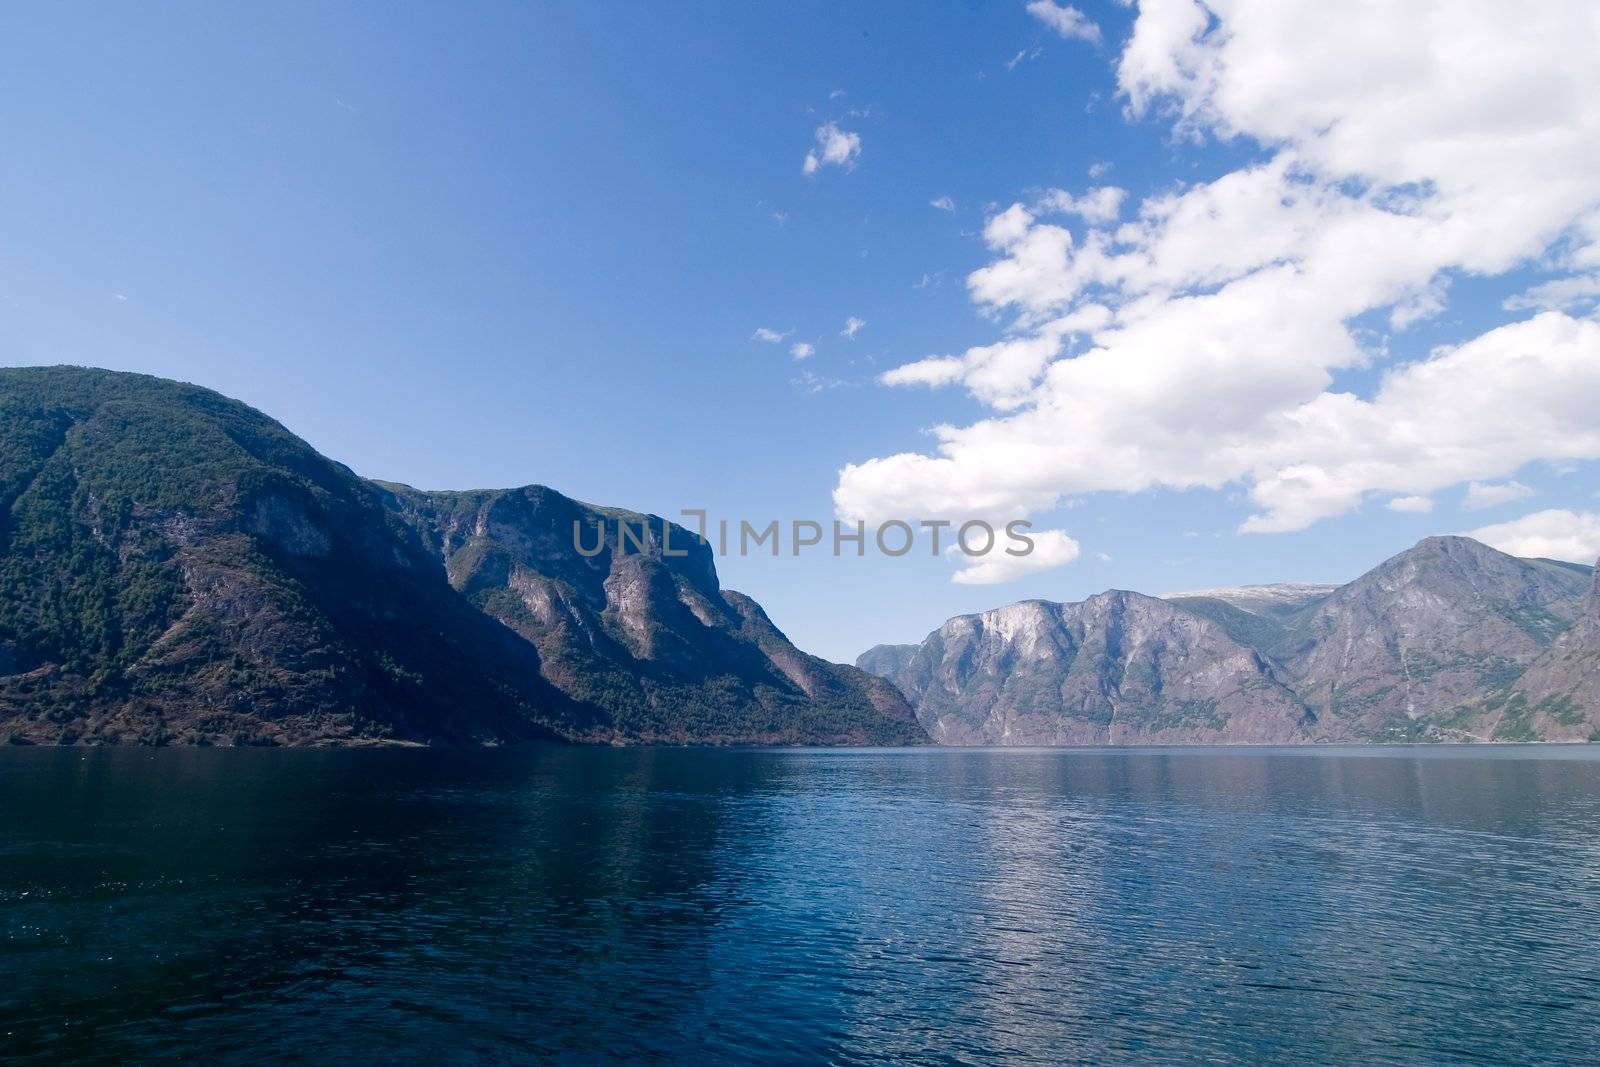 Aurlandsfjord which is part of Sognefjord, Norway.